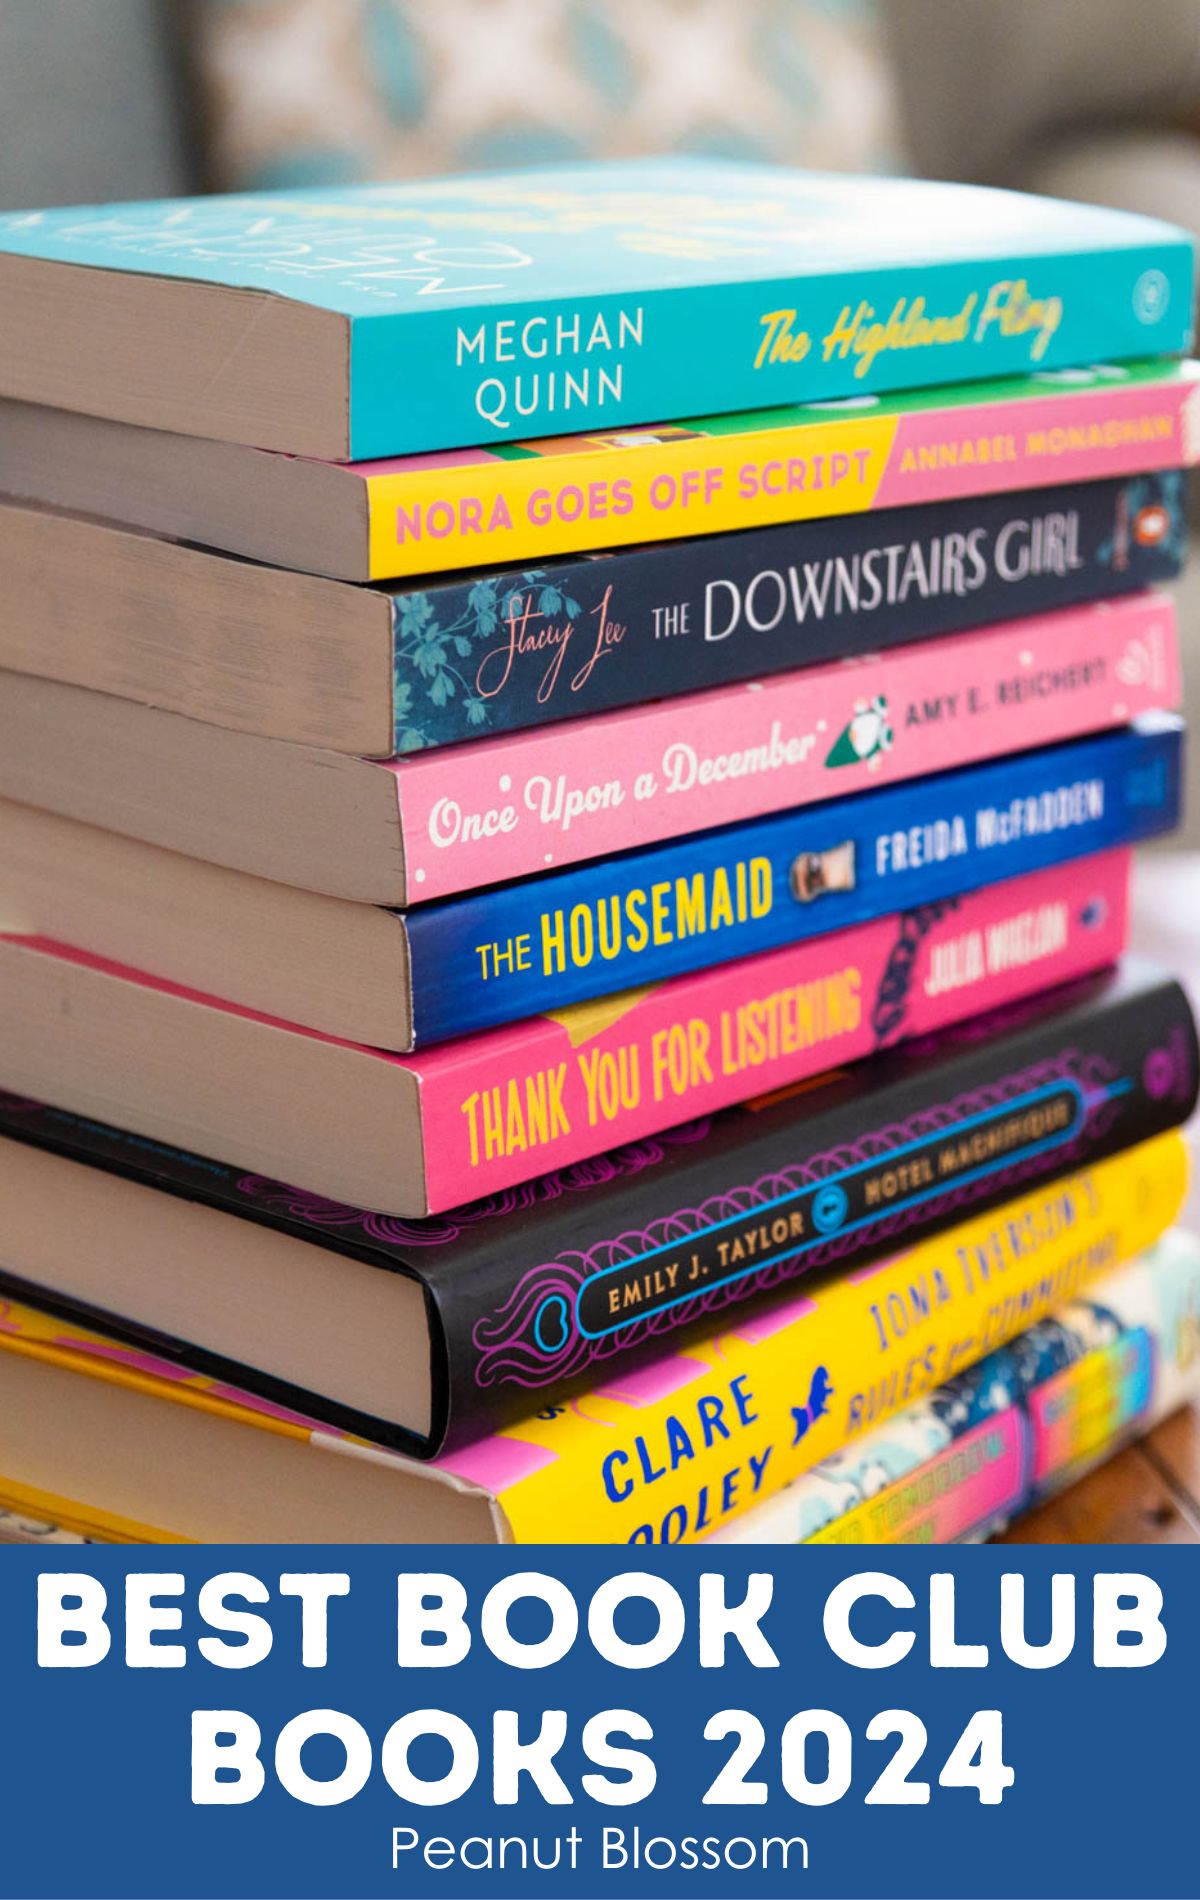 A stack of books from the new book club list sit on the table.